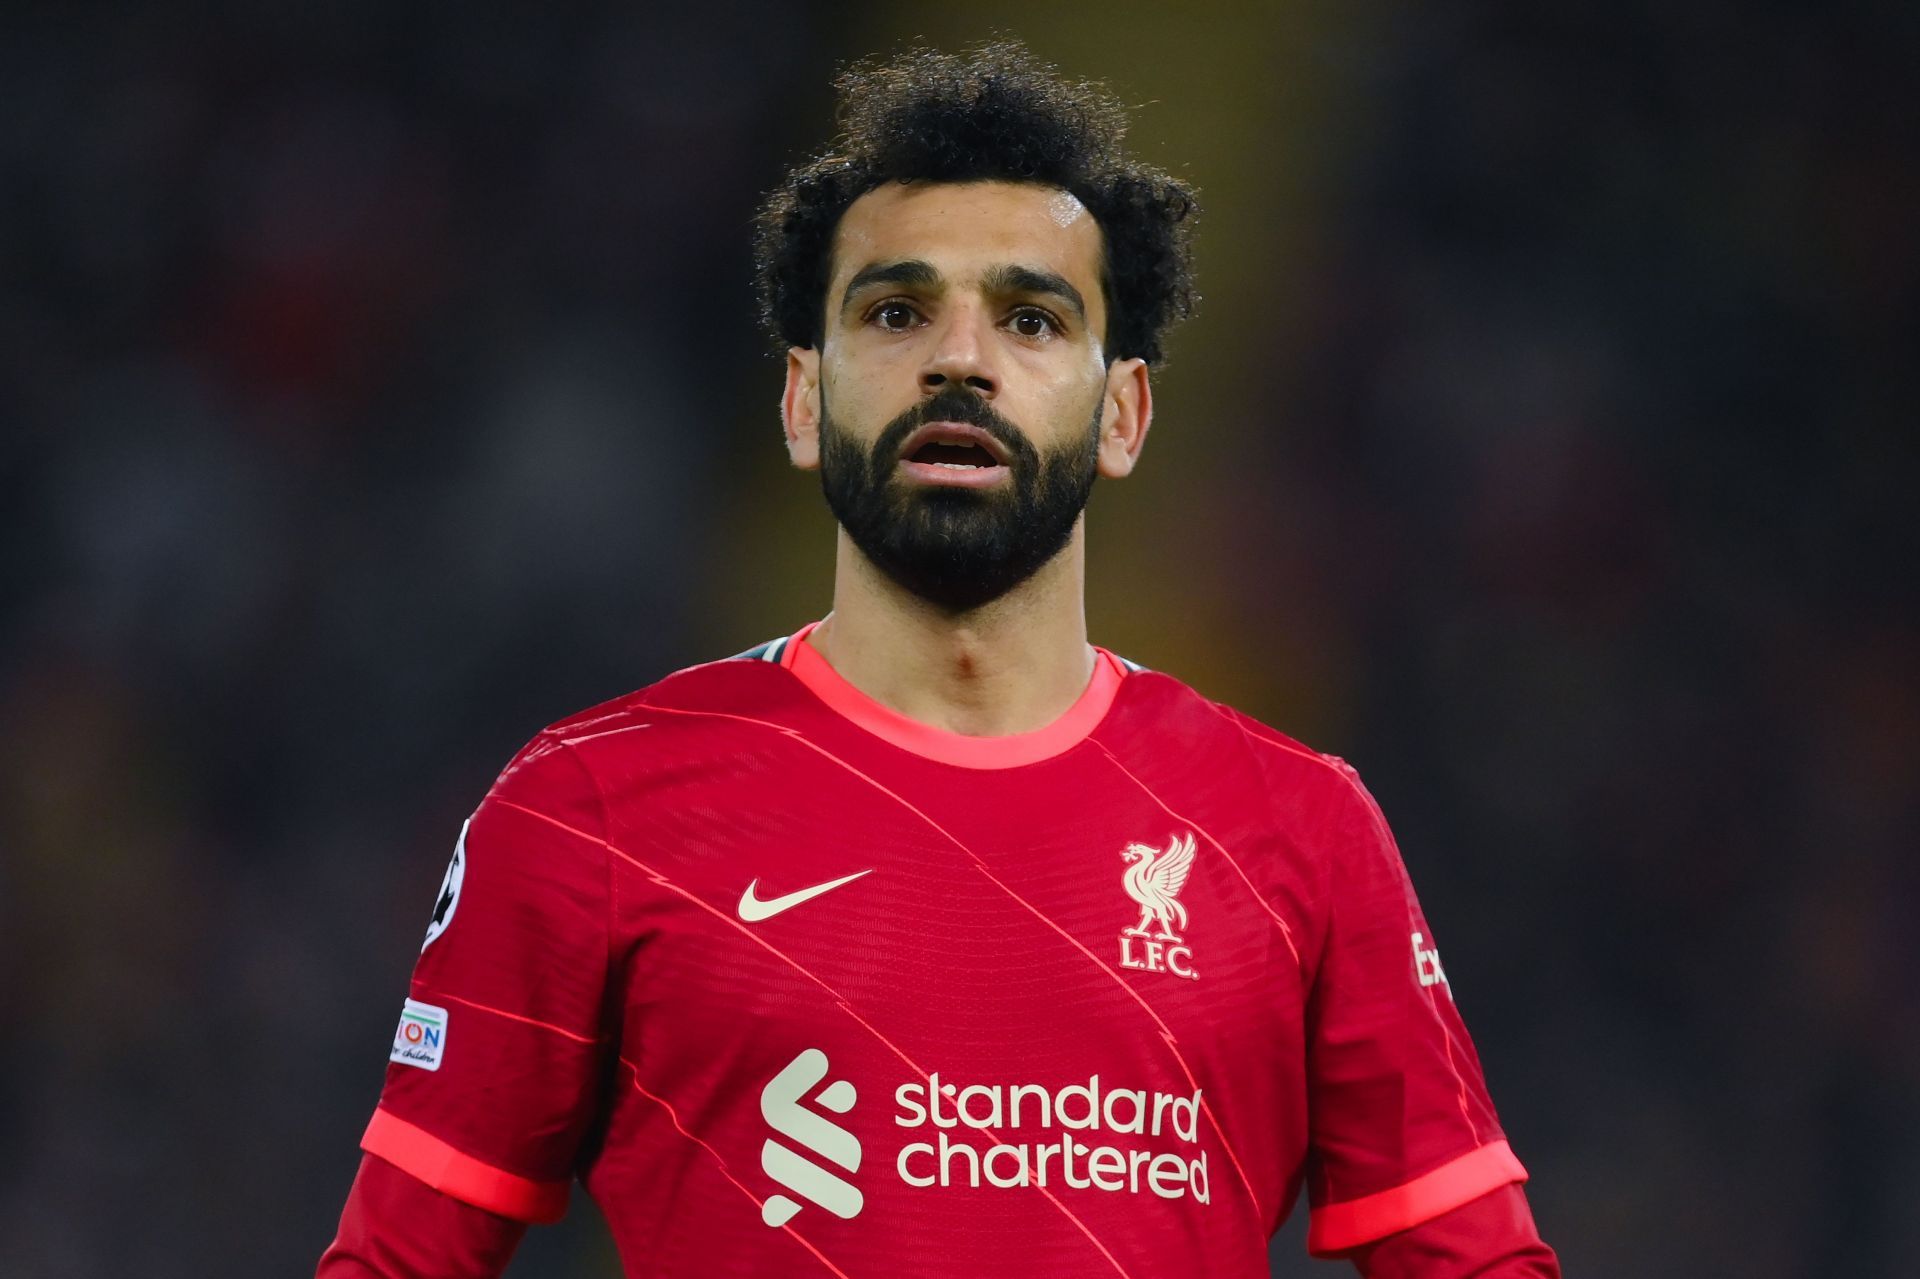 Salah could be benched for the Newcastle encounter